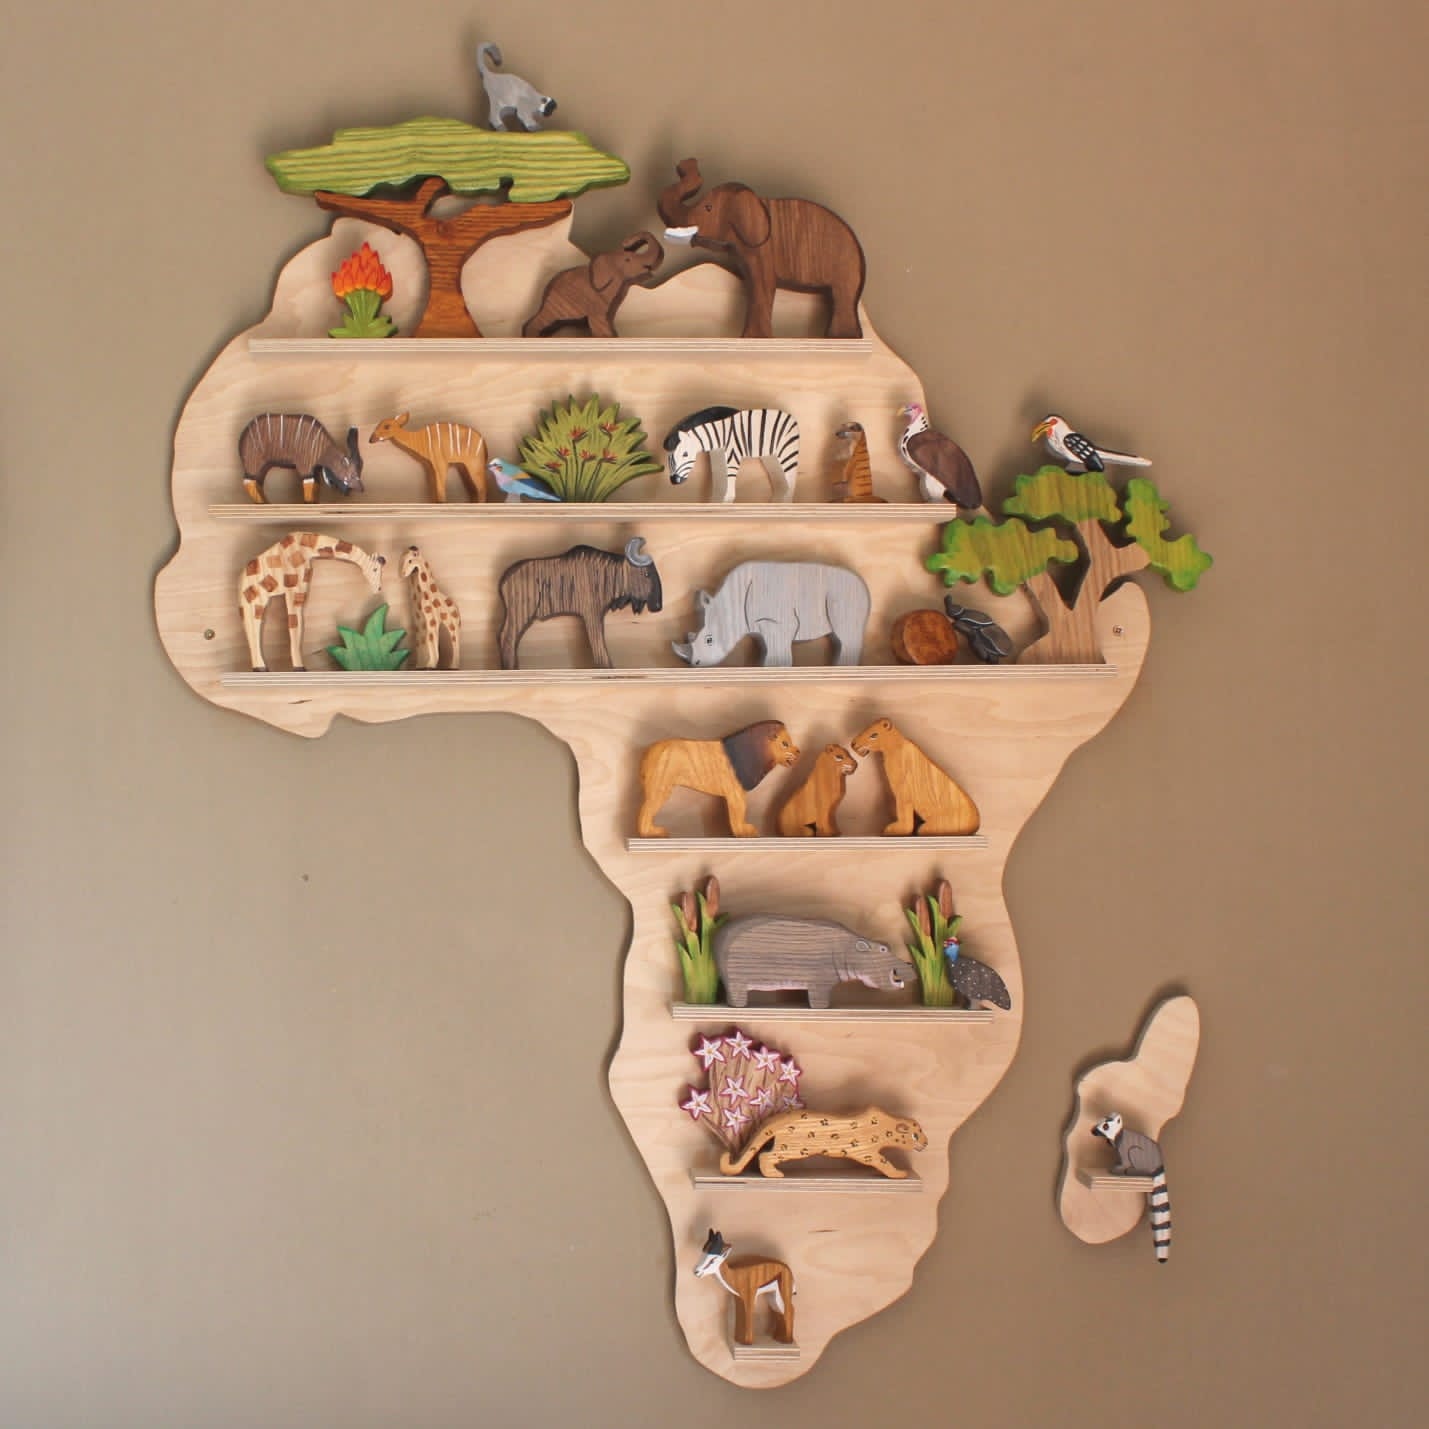 Animals and Scenery for Africa (Shelf Not Included) - Good Shepherd Toys